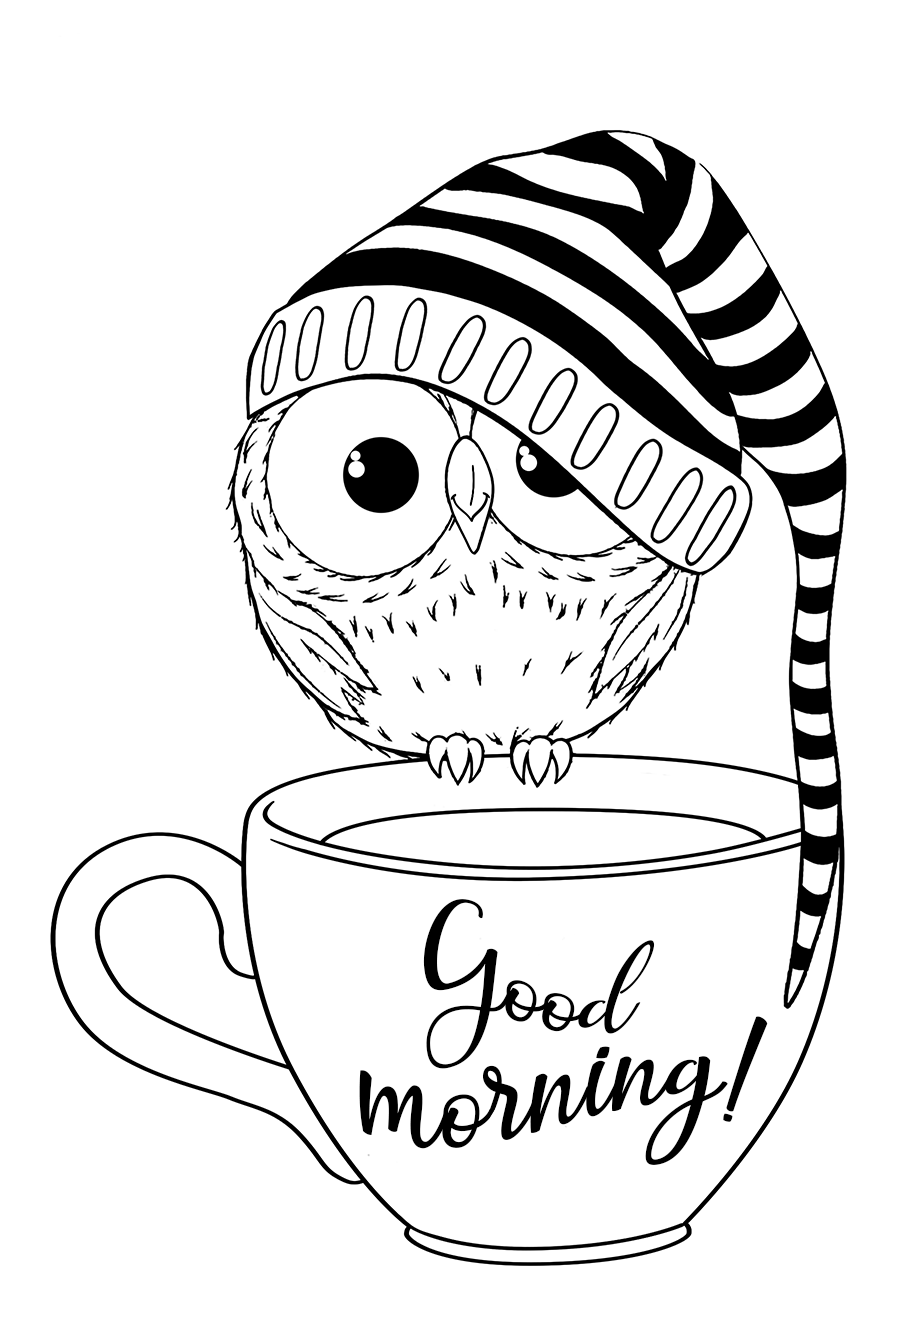 Good morning - Coloring pages for you